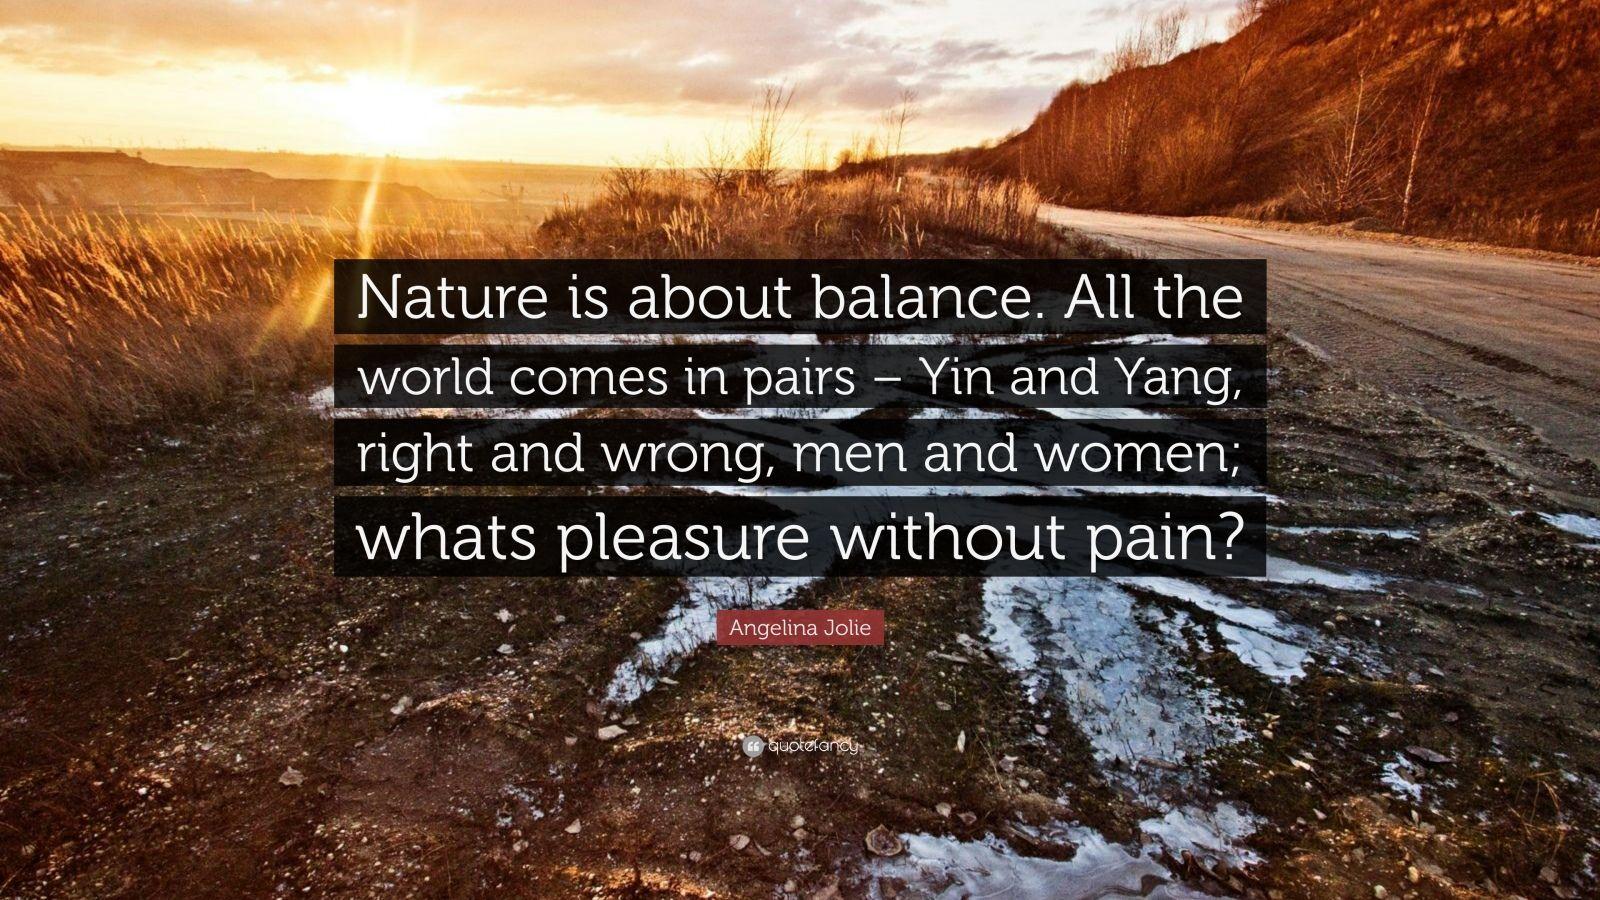 Angelina Jolie Quote: “Nature is about balance. All